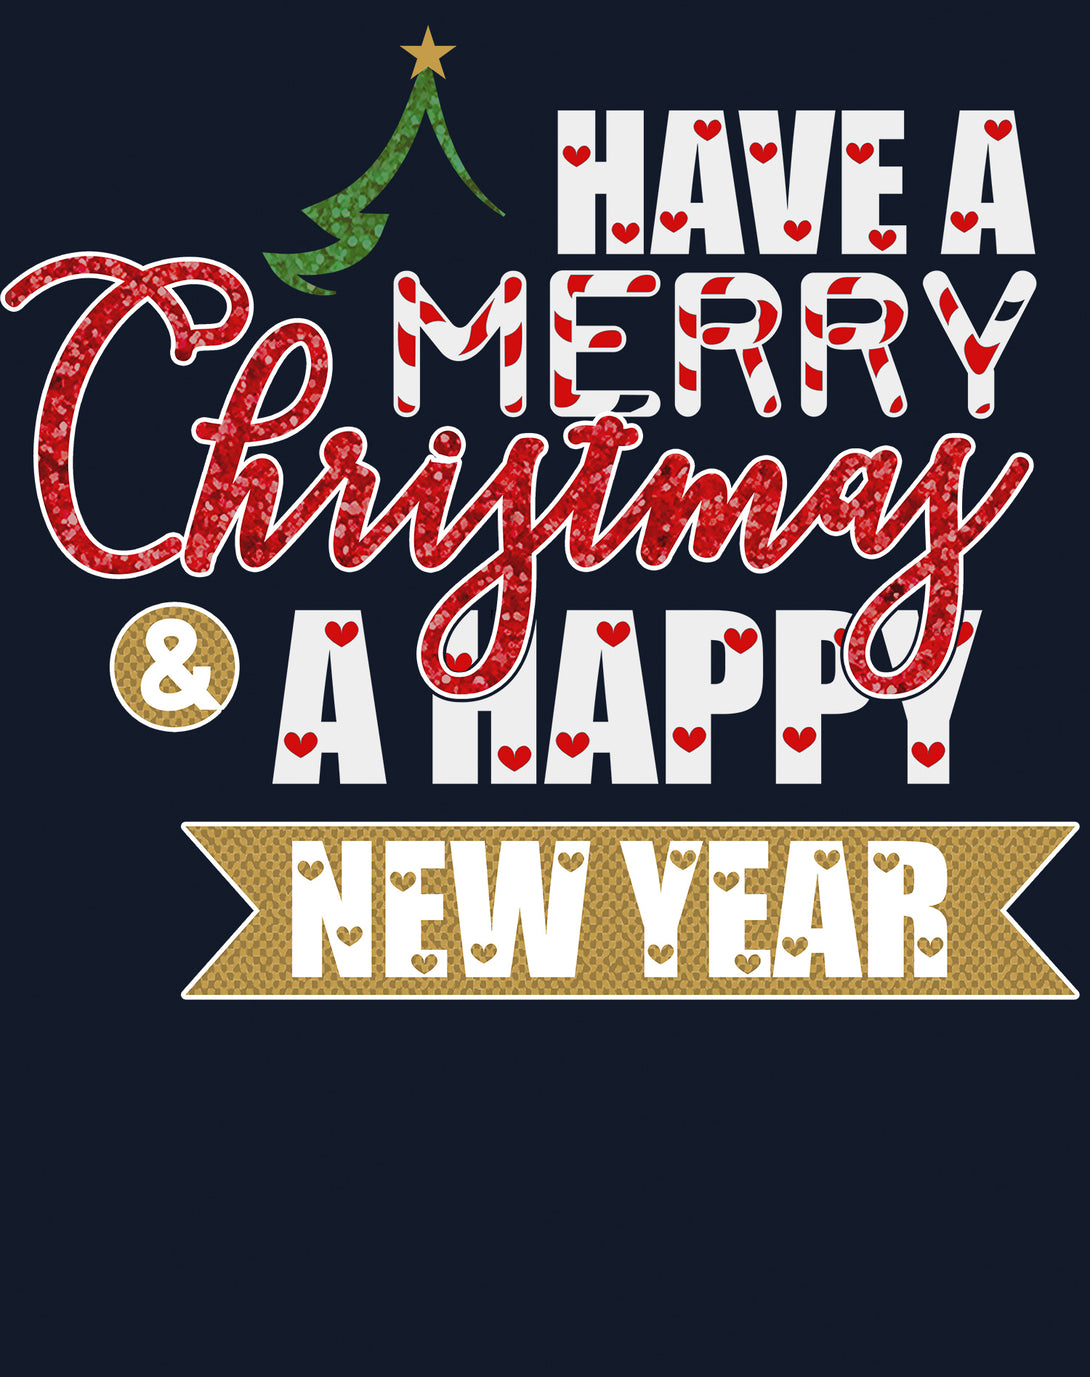 NYE Merry Christmas Happy New Year Hearts Party Xmas Eve Women's T-Shirt Navy - Urban Species Design Close Up